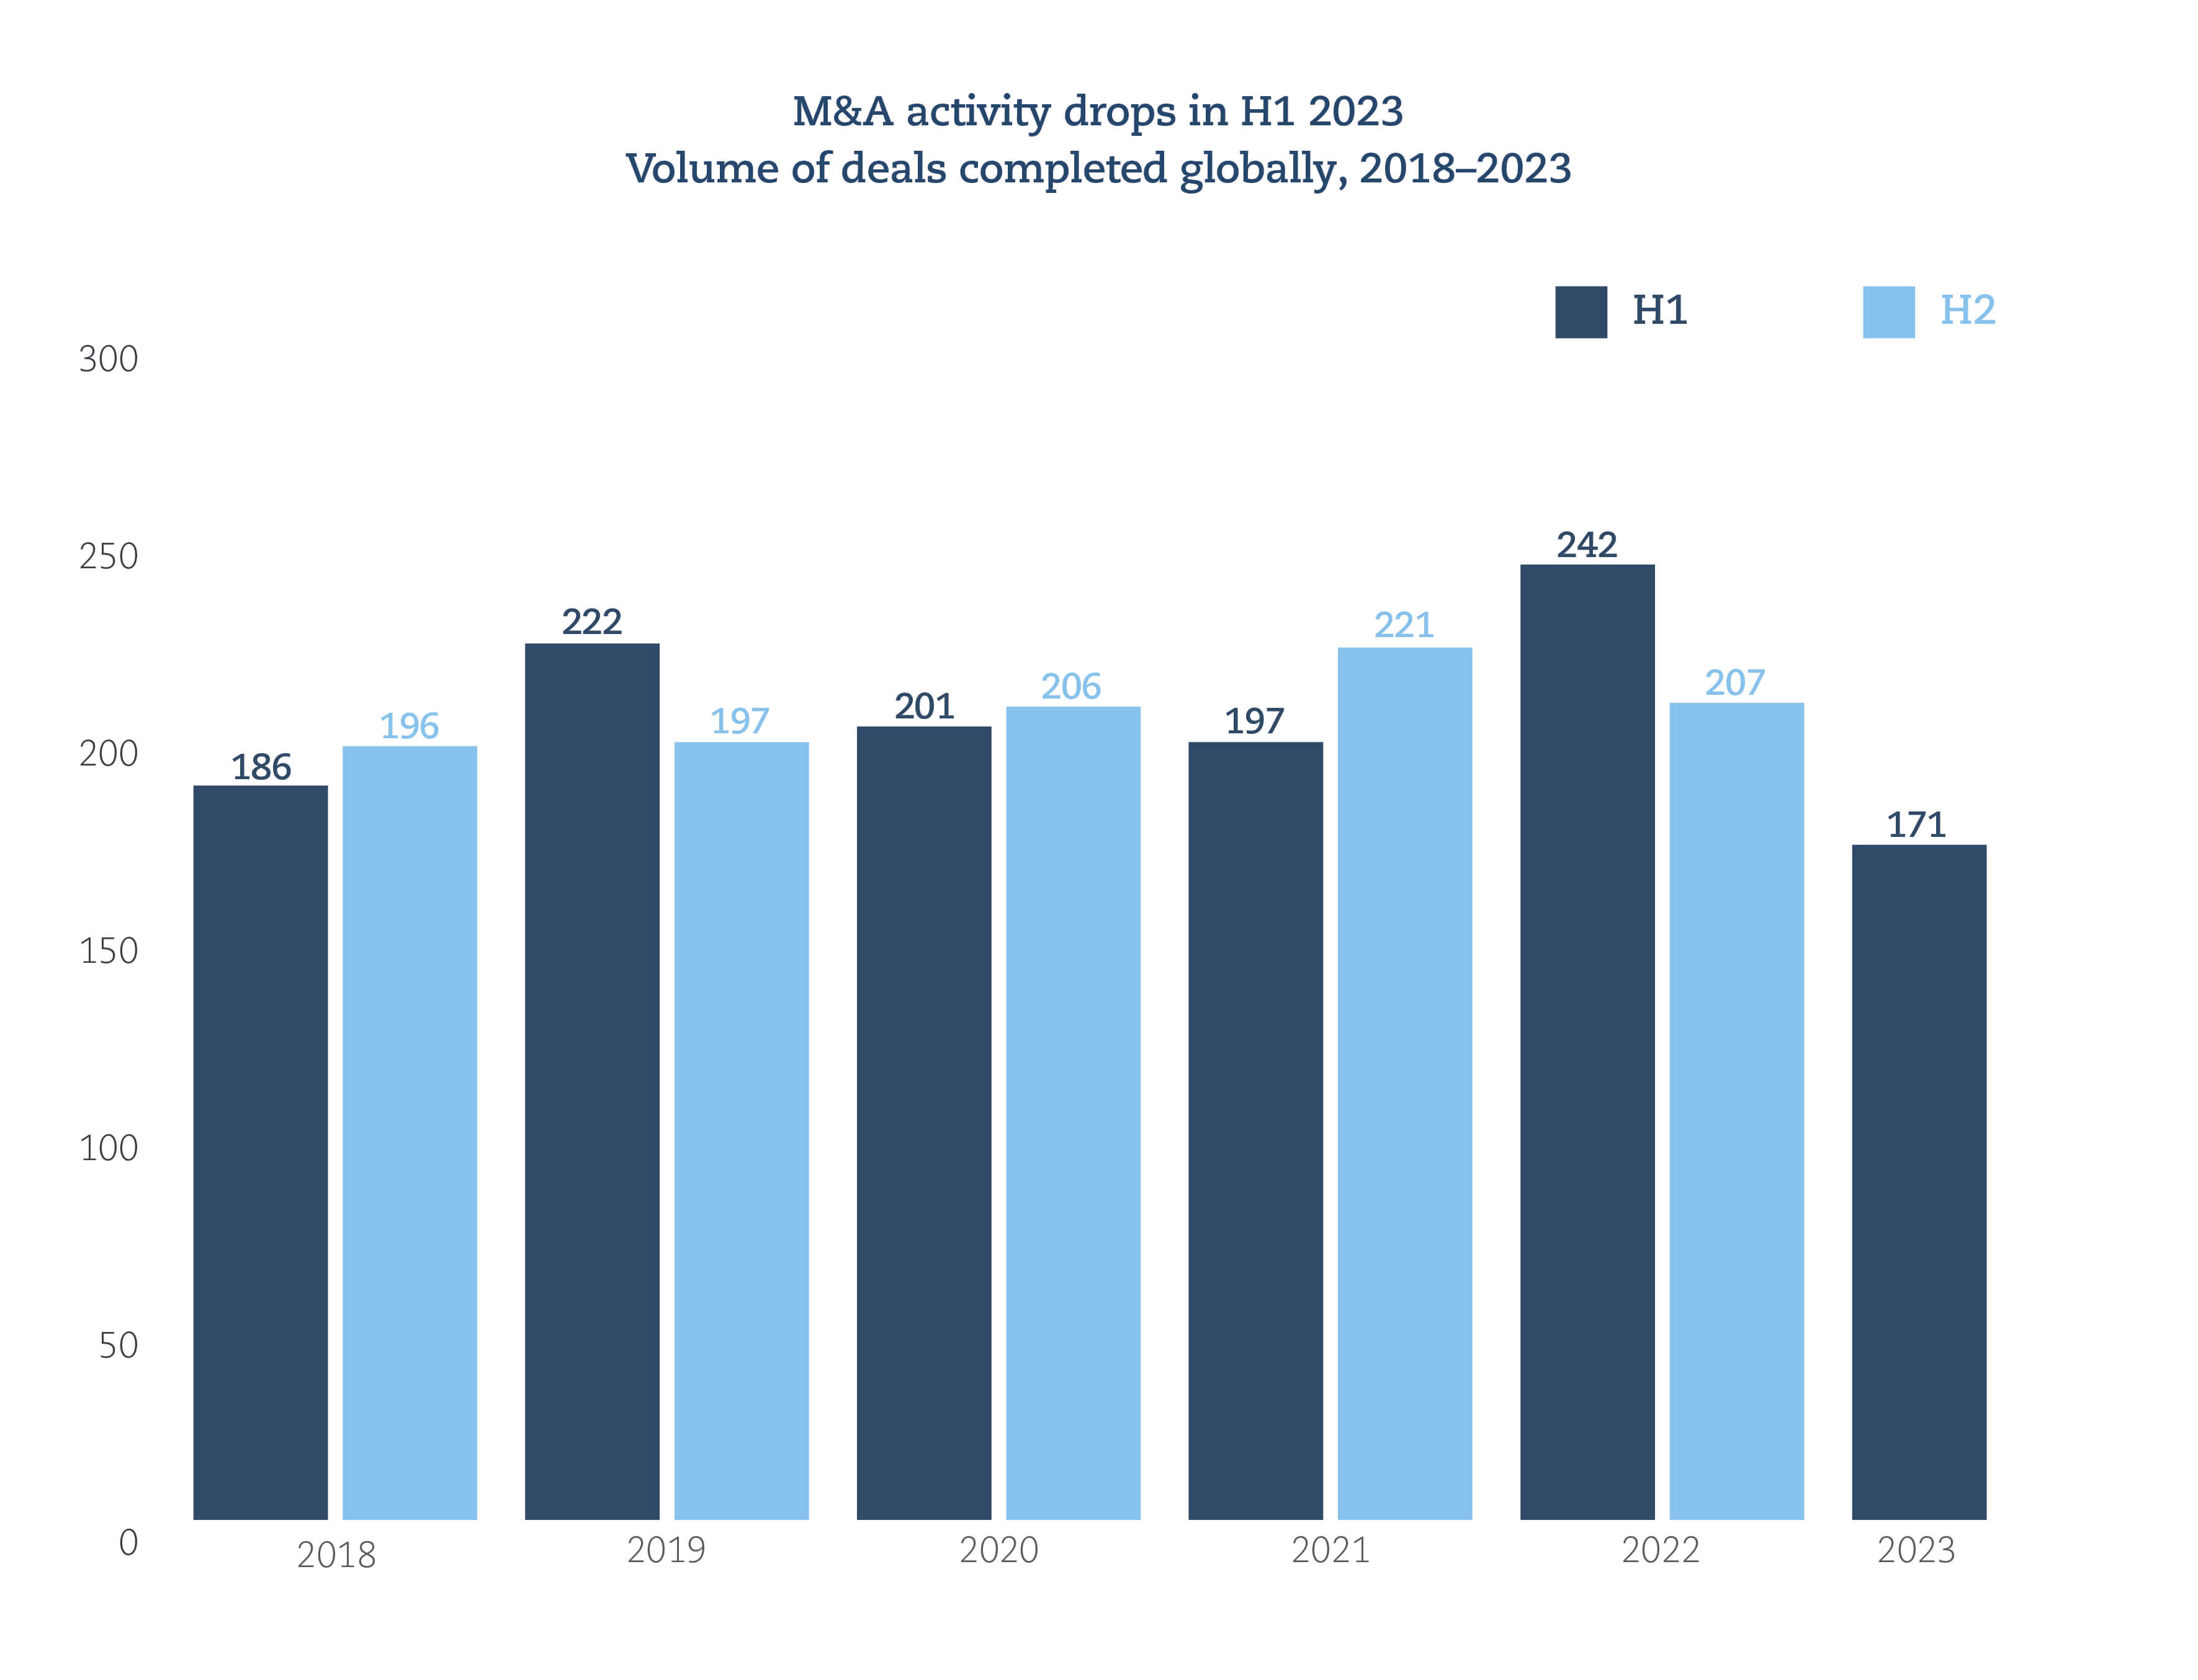 M&A activity in insurance sector 2023